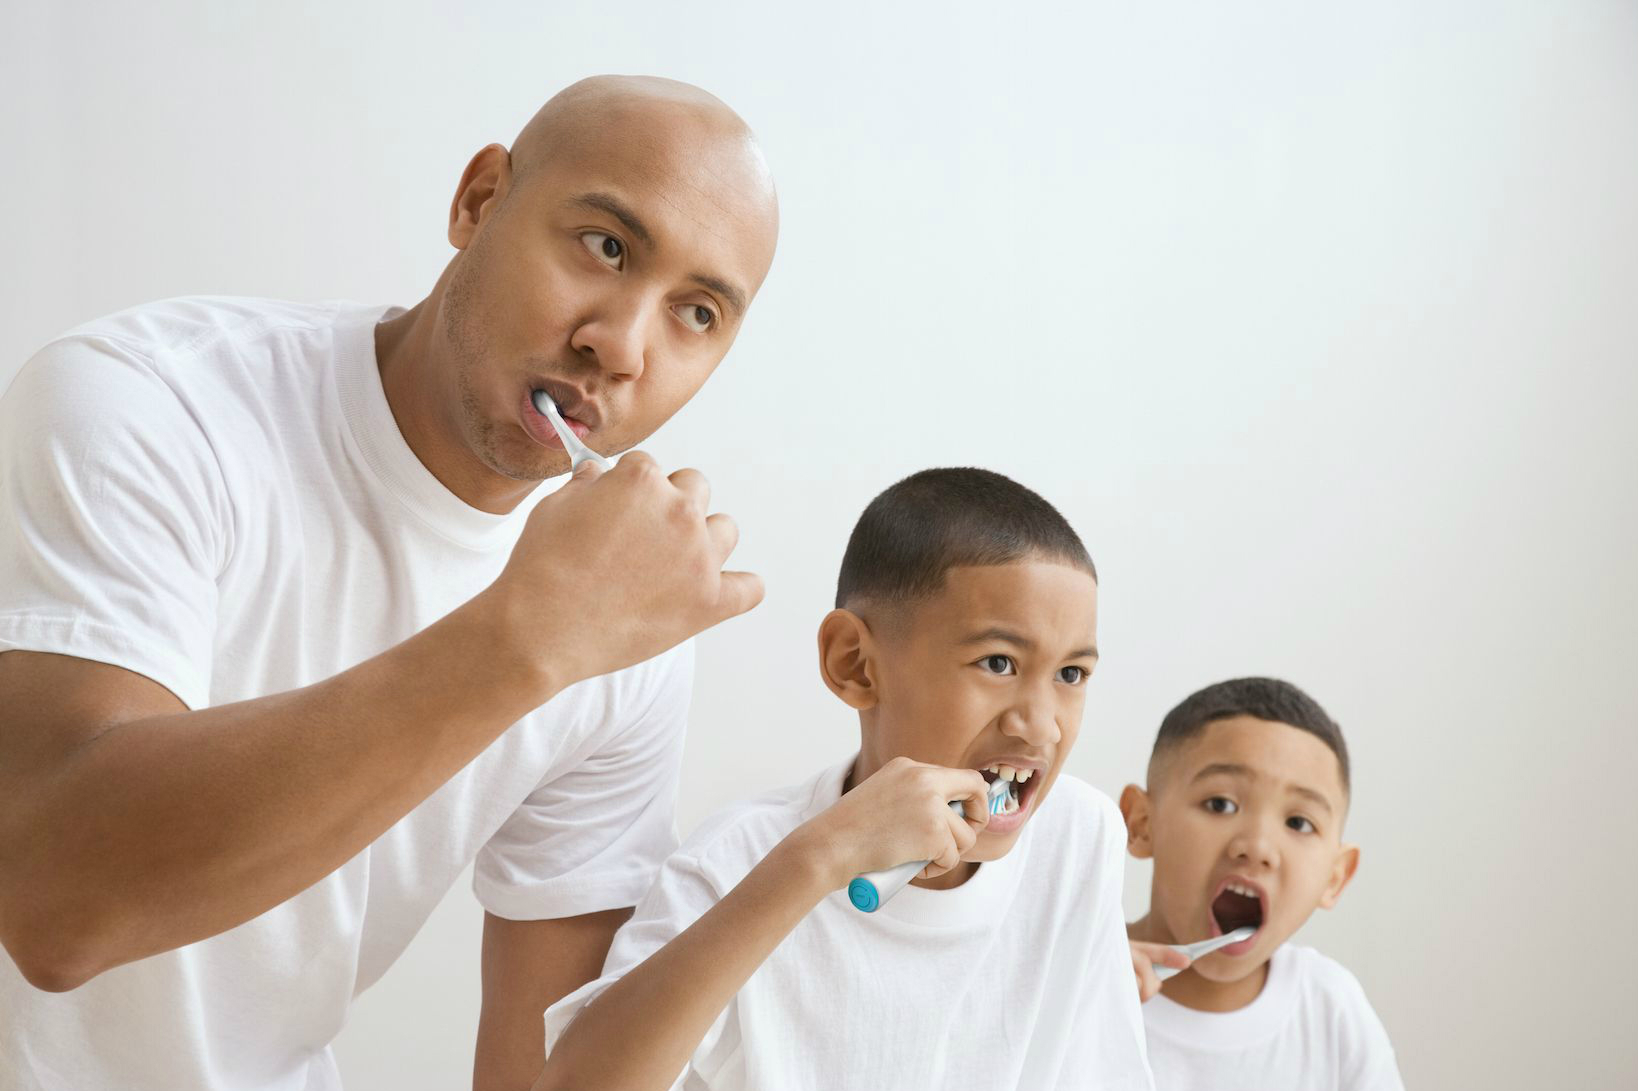 beam technologies introduces dental insurance with its smart toothbrush